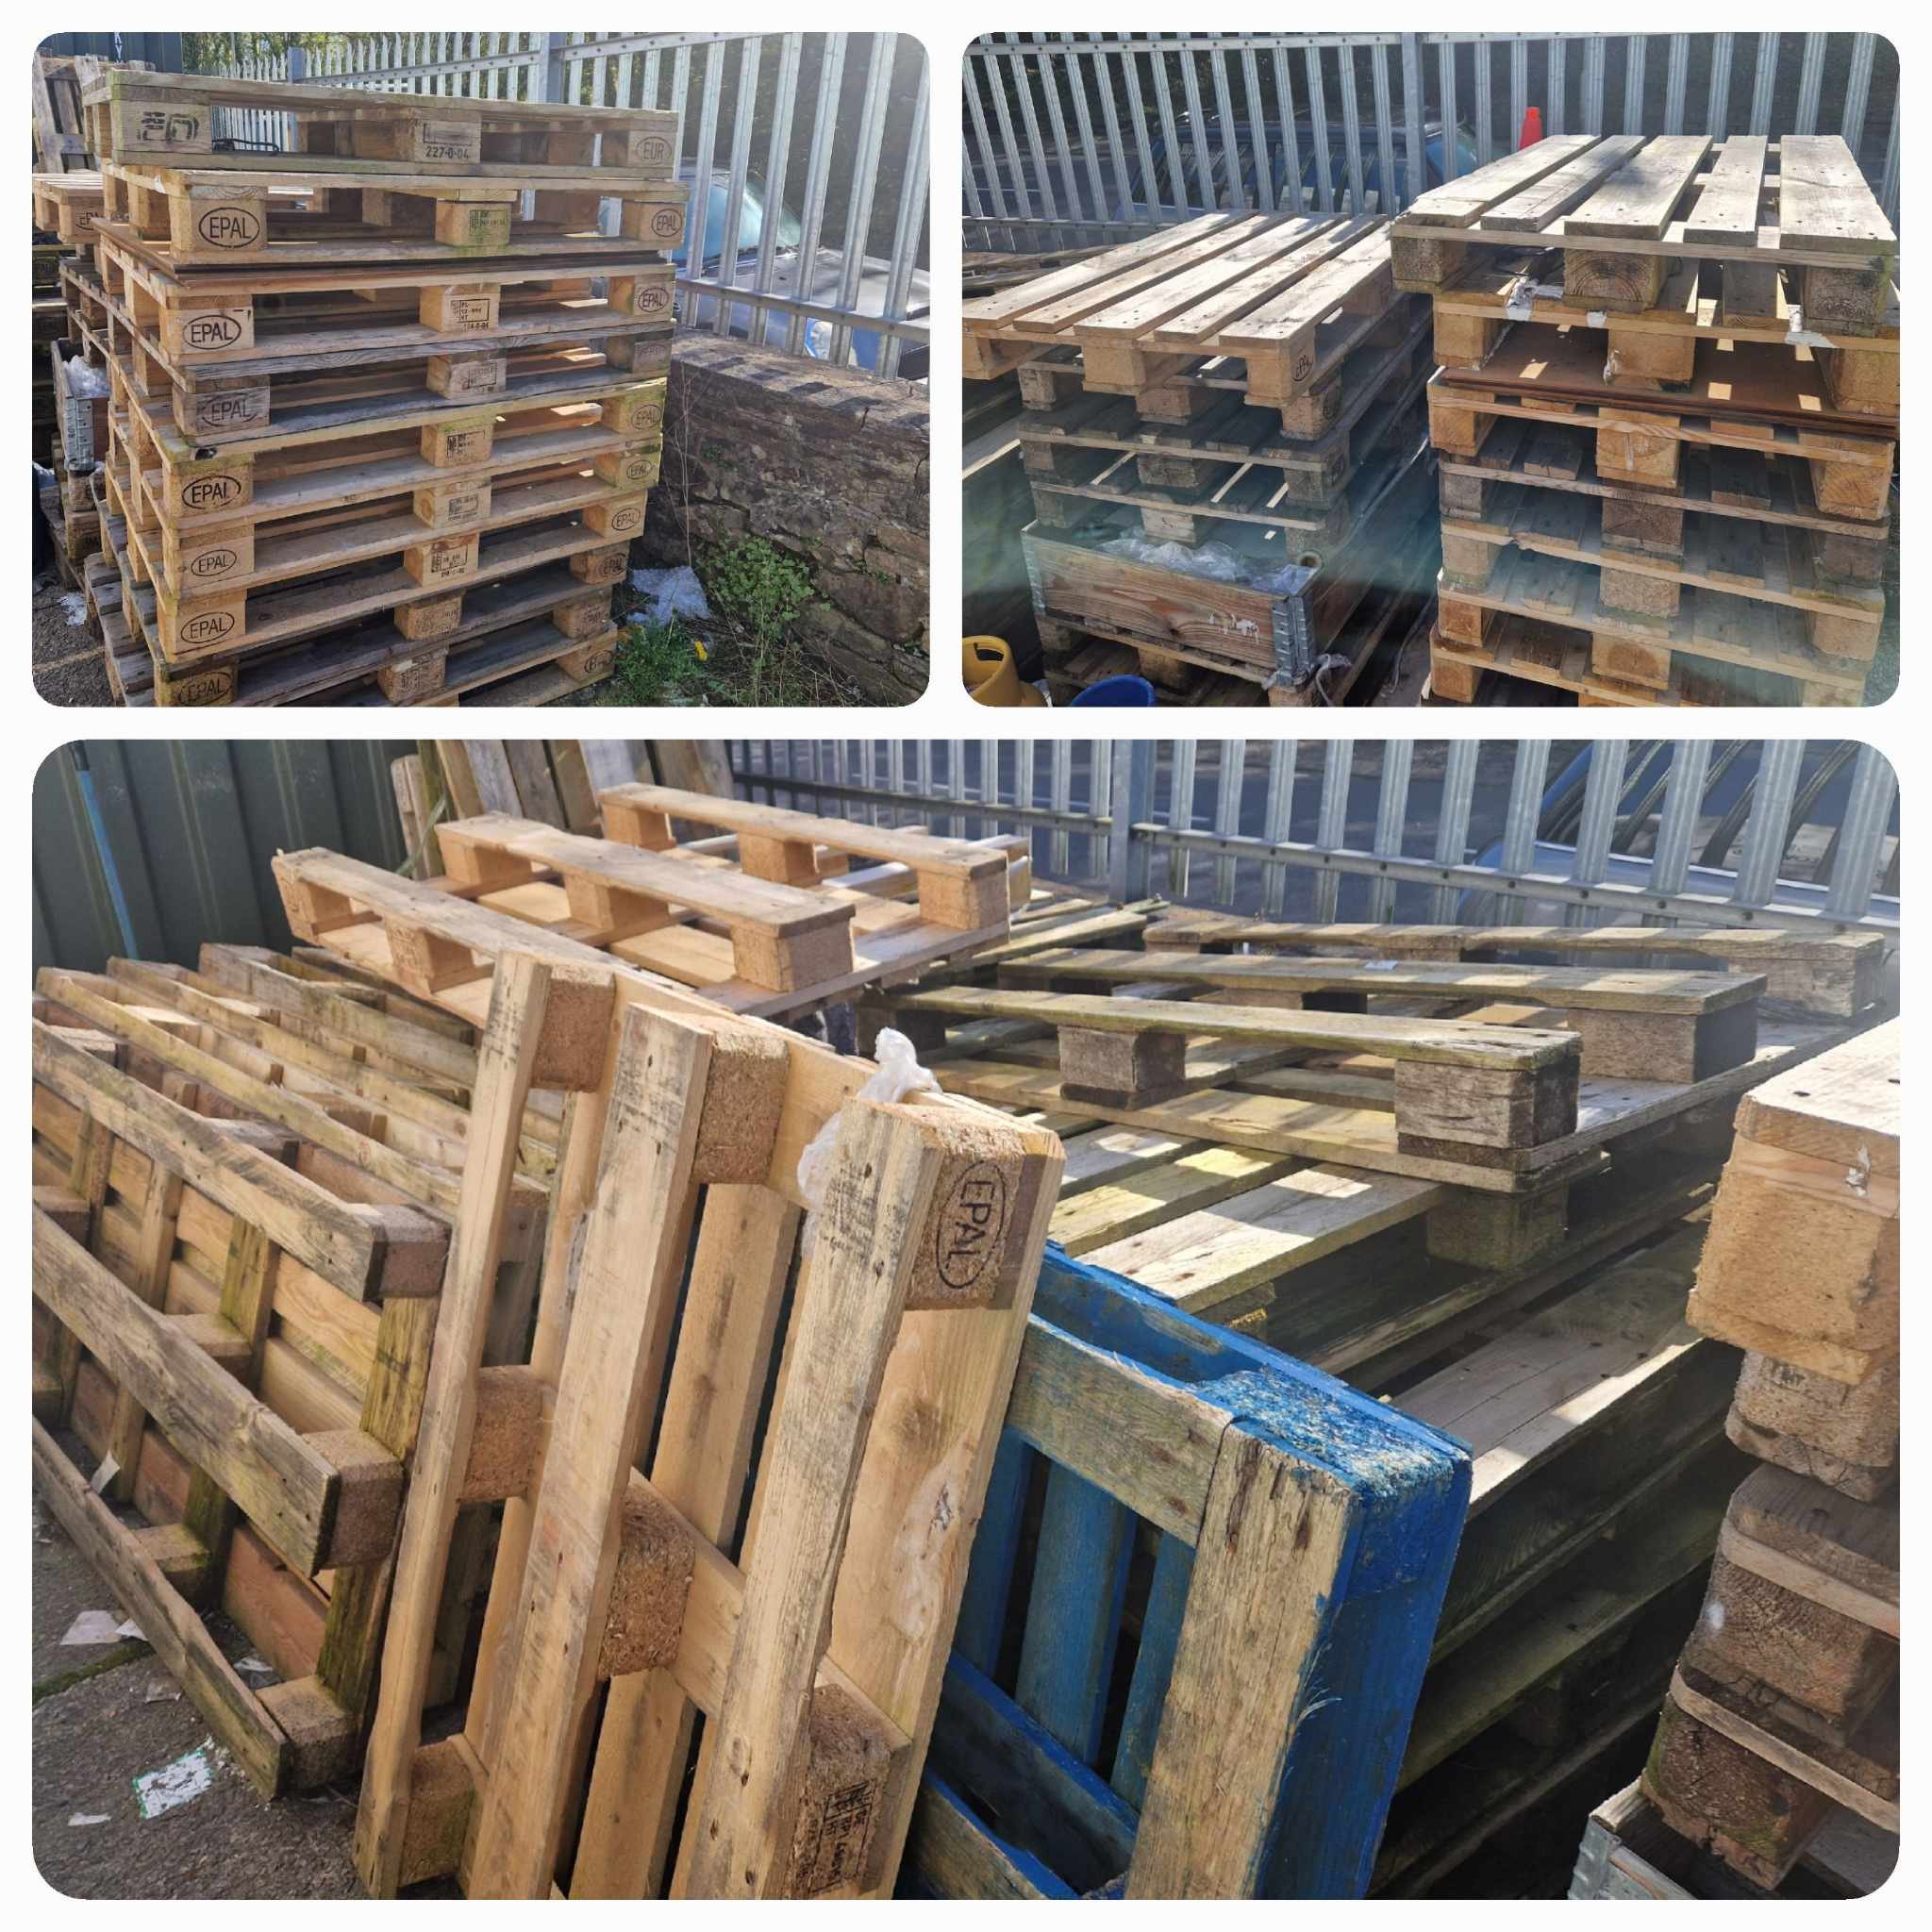 ✨️ FREE PALLETS @ YNYSHIR ✨️

Are you looking for some pallets? Then call into our Ynyshir showroom today to pick some up for free 😁.

‼️Please note these are offered on a first come first serve basis, we're unable to hold or reserve them and they'r